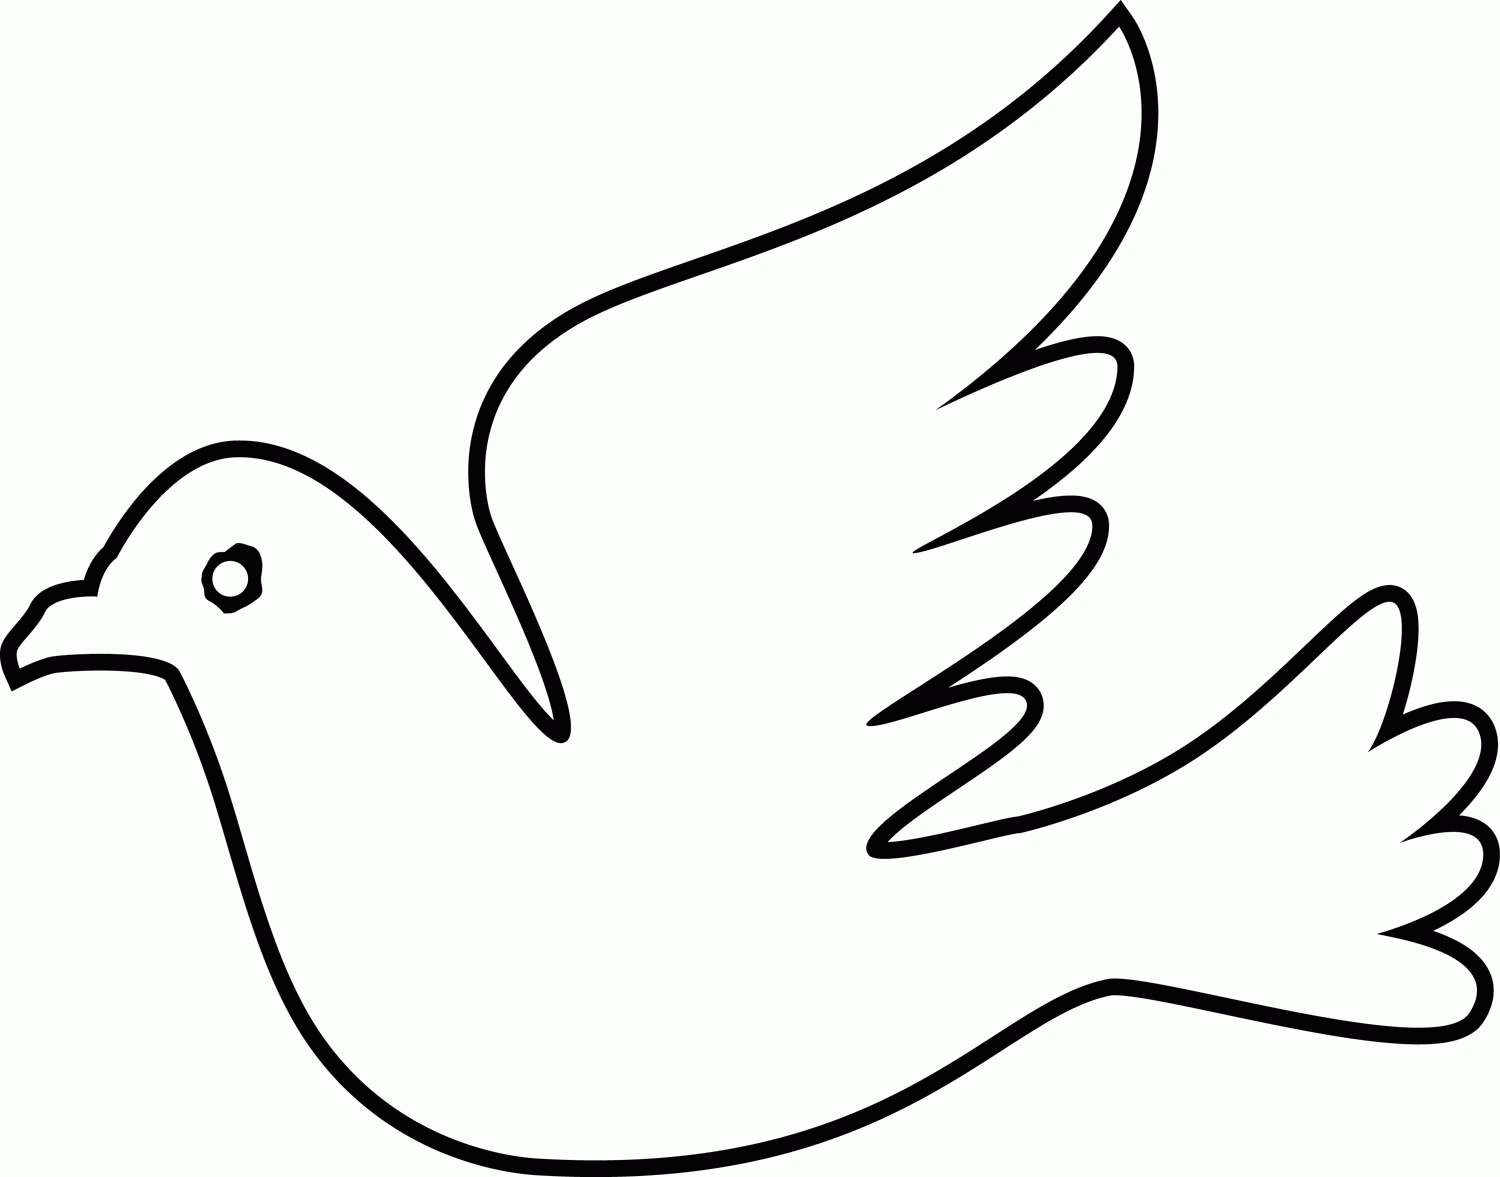 Free, Printable Dove Coloring Page for Kids 27810 ...